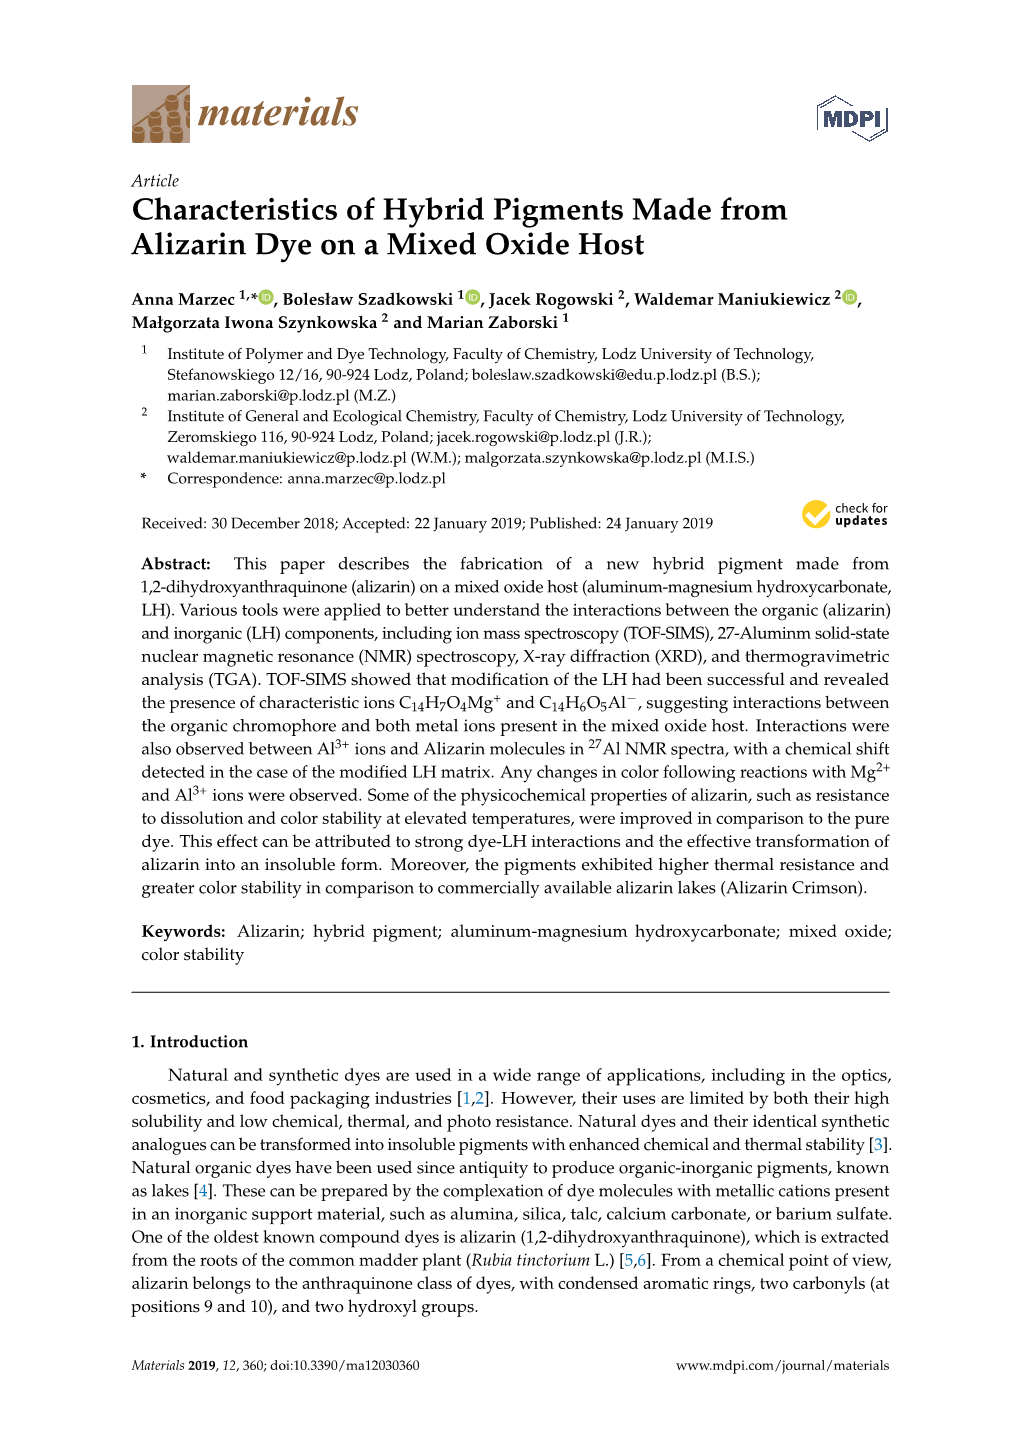 Characteristics of Hybrid Pigments Made from Alizarin Dye on a Mixed Oxide Host